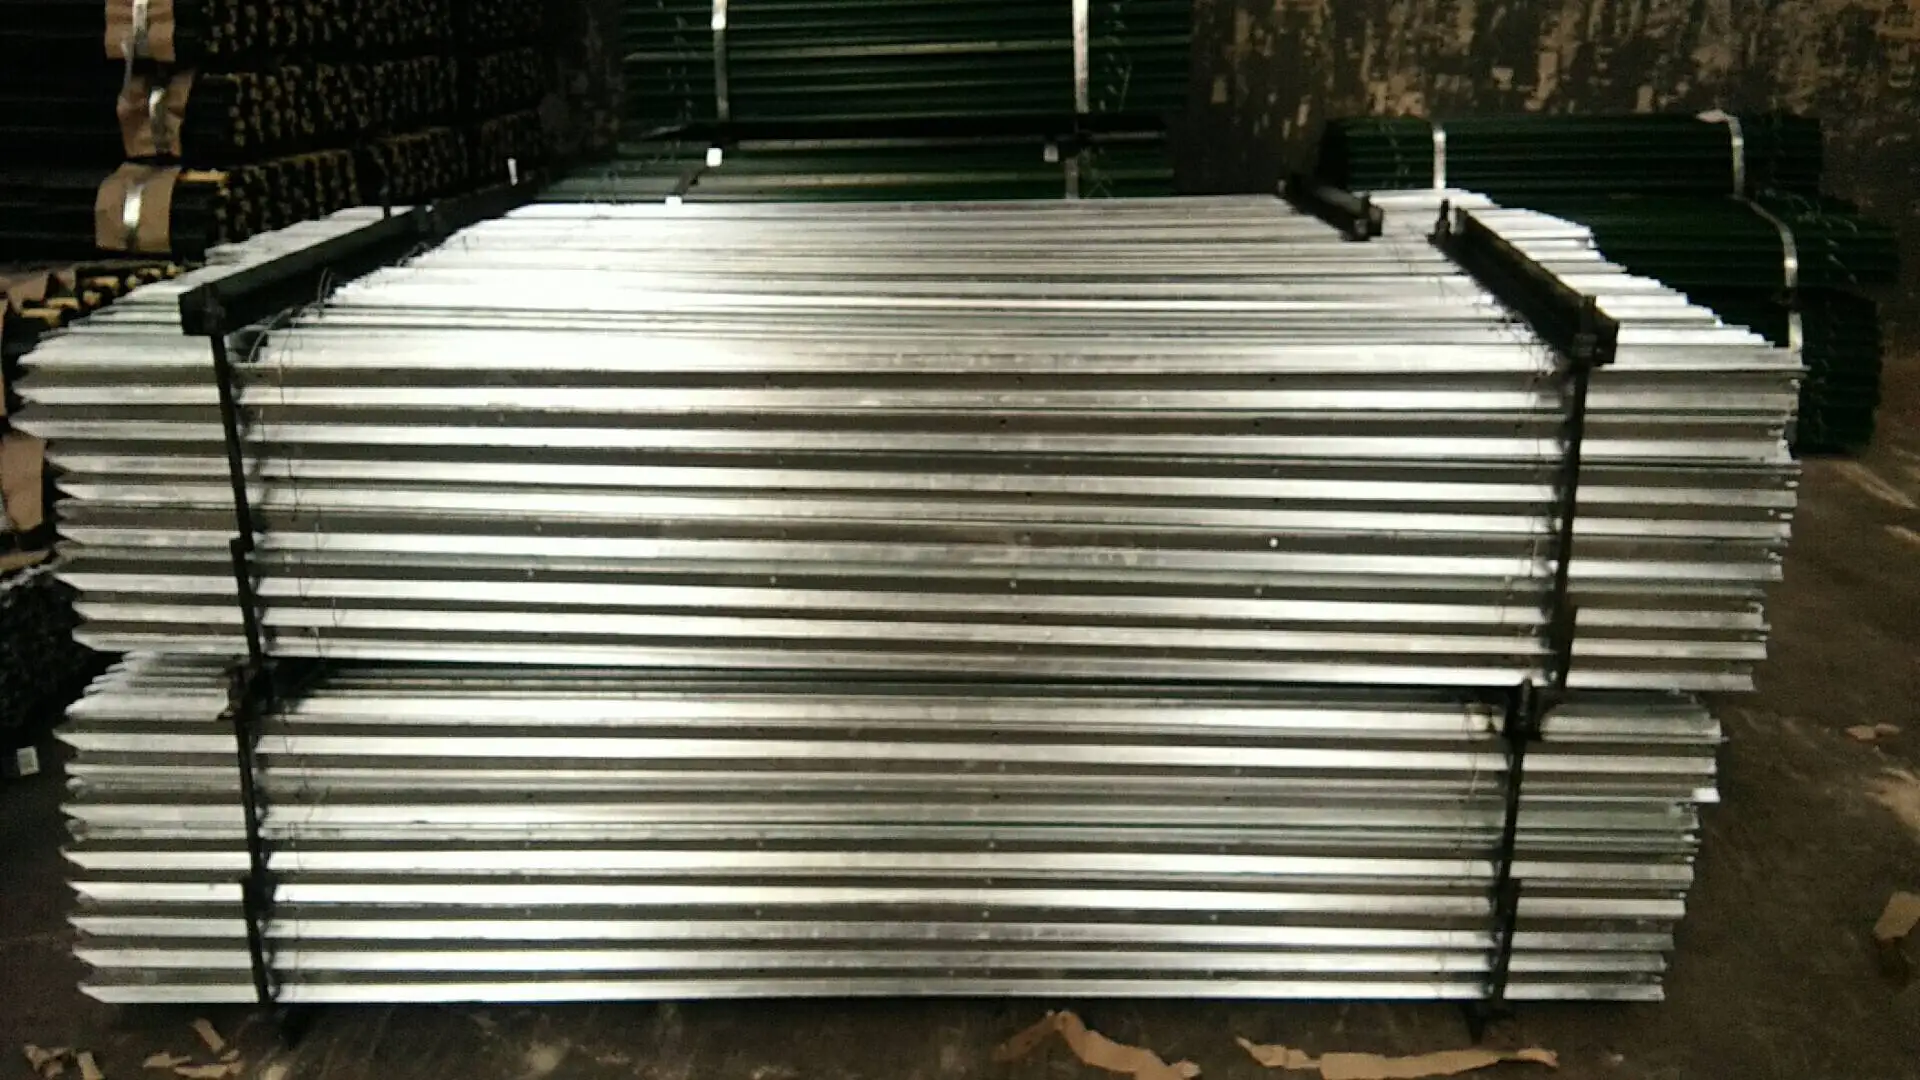 Star Picket 1.58kg x 2100mm for Farm and Temp Fencing Panels